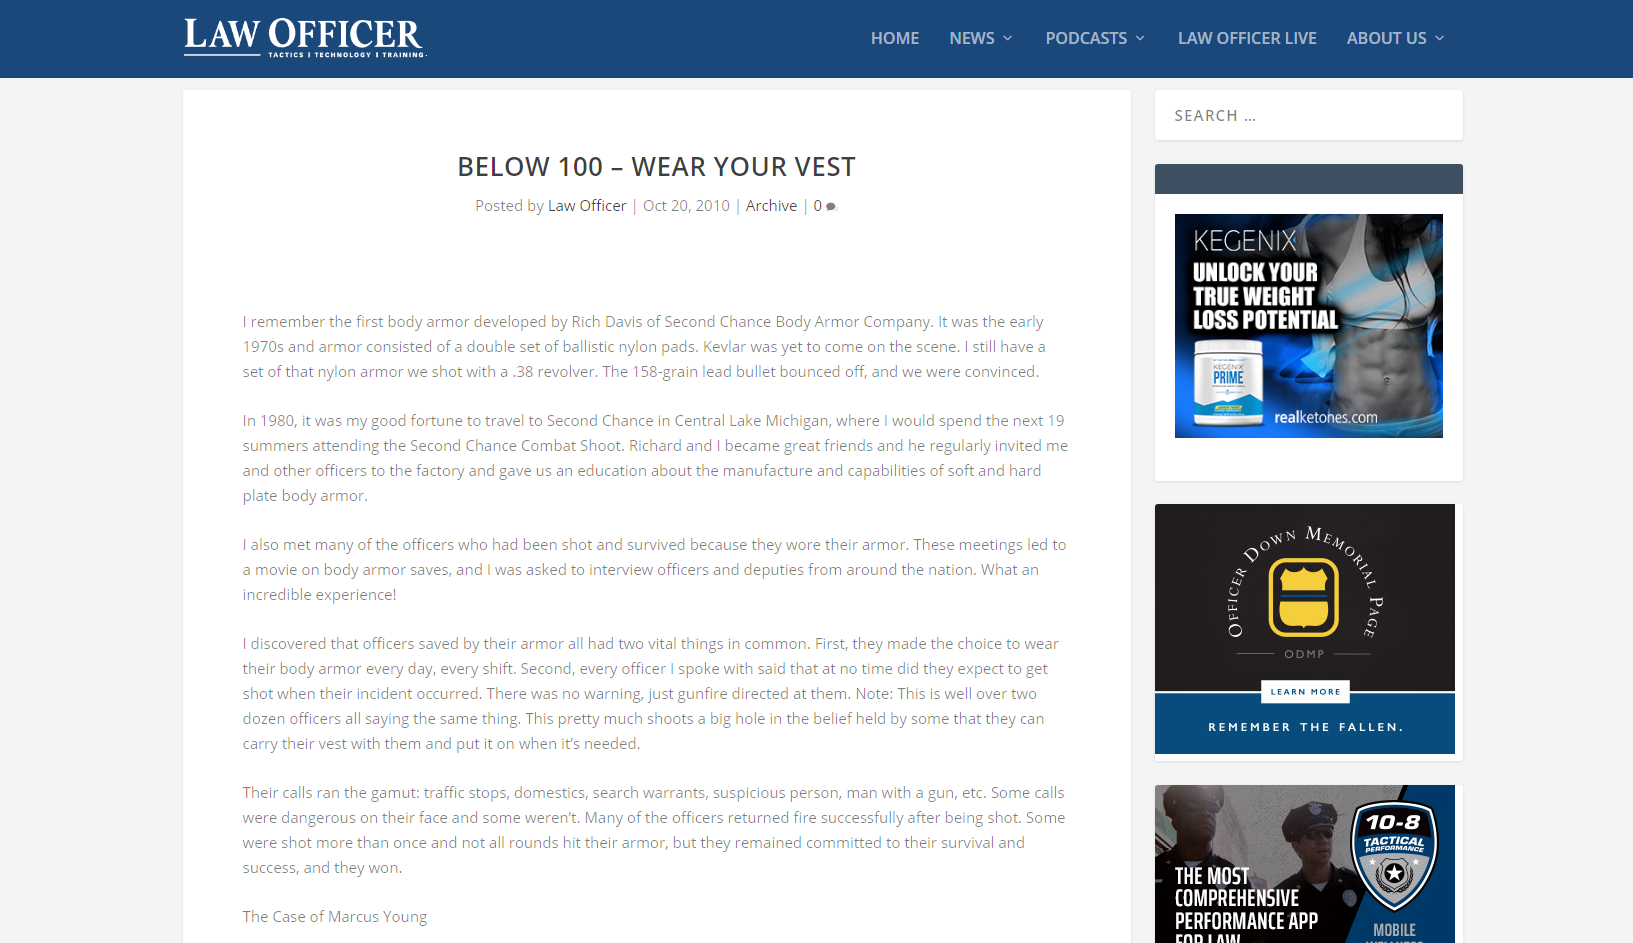 Article on website about wearing your body armor